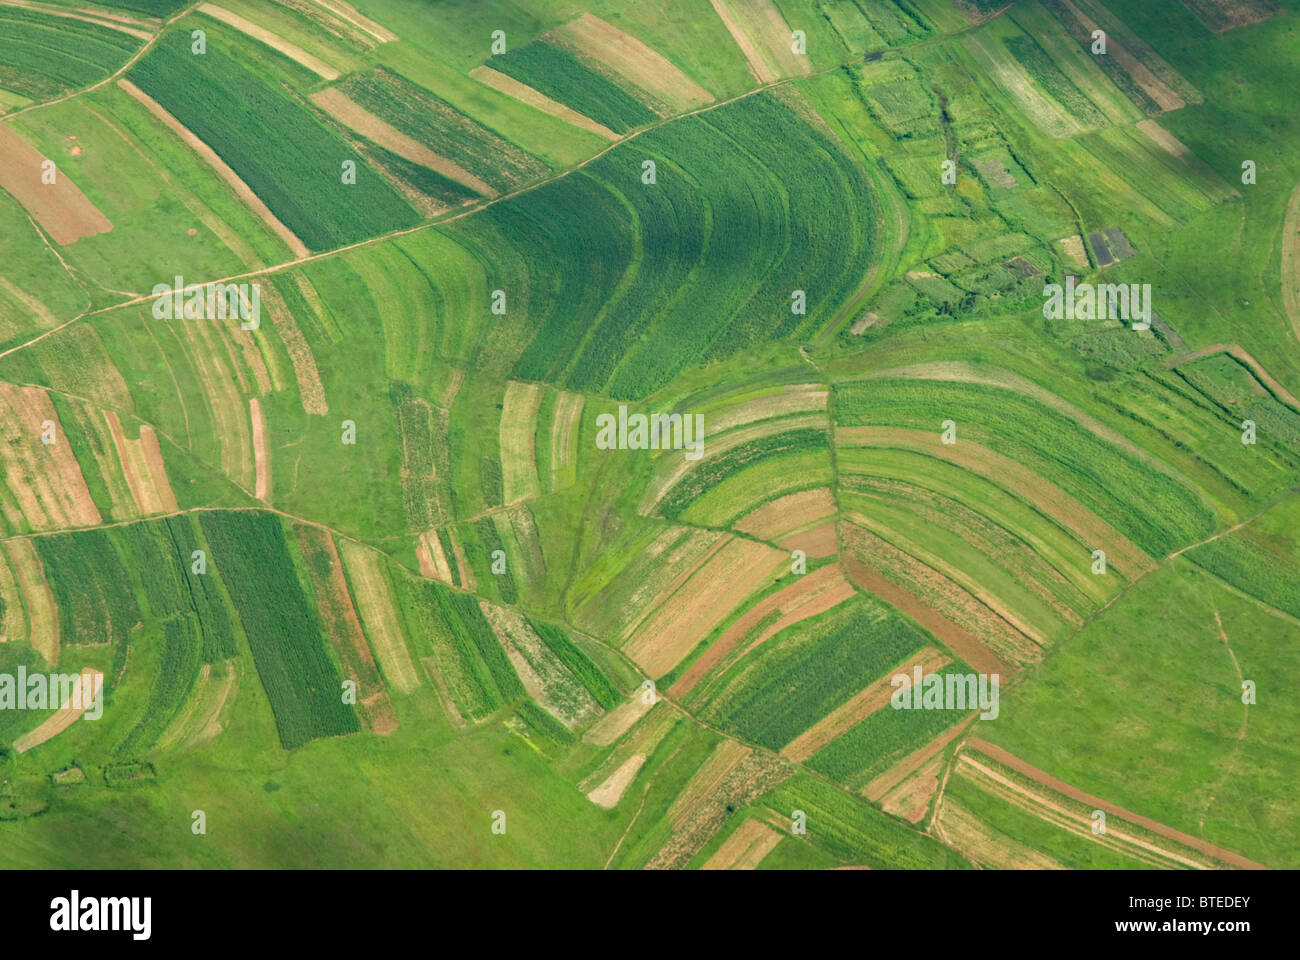 Aerial scenic view of cultivated land in Zambia Stock Photo